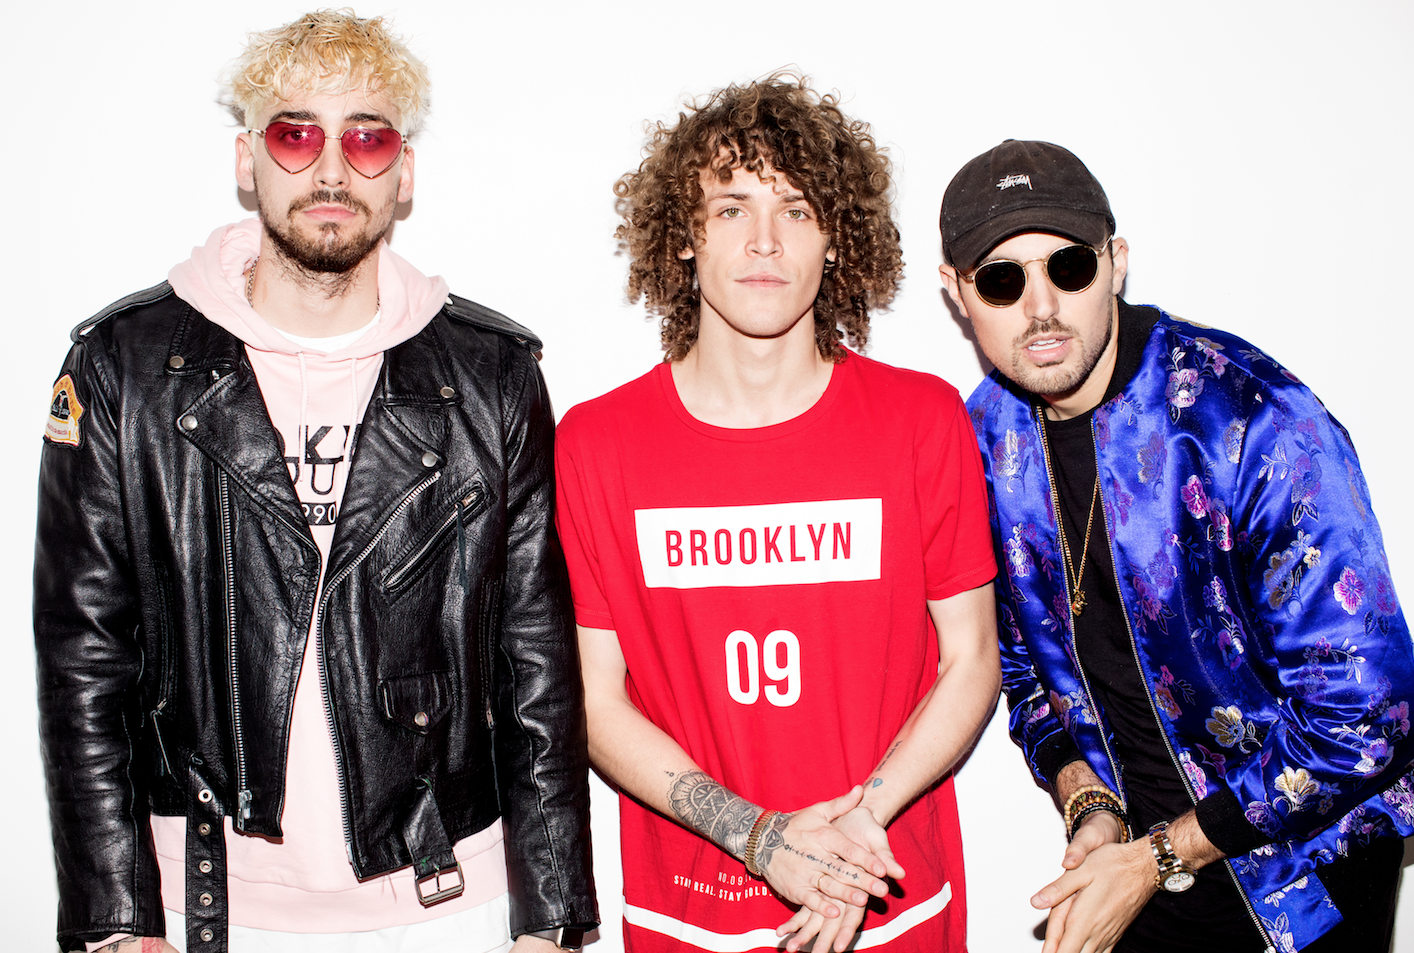 Feeling young “Feels Great” with the new Cheat Codes and Fetty Wap track